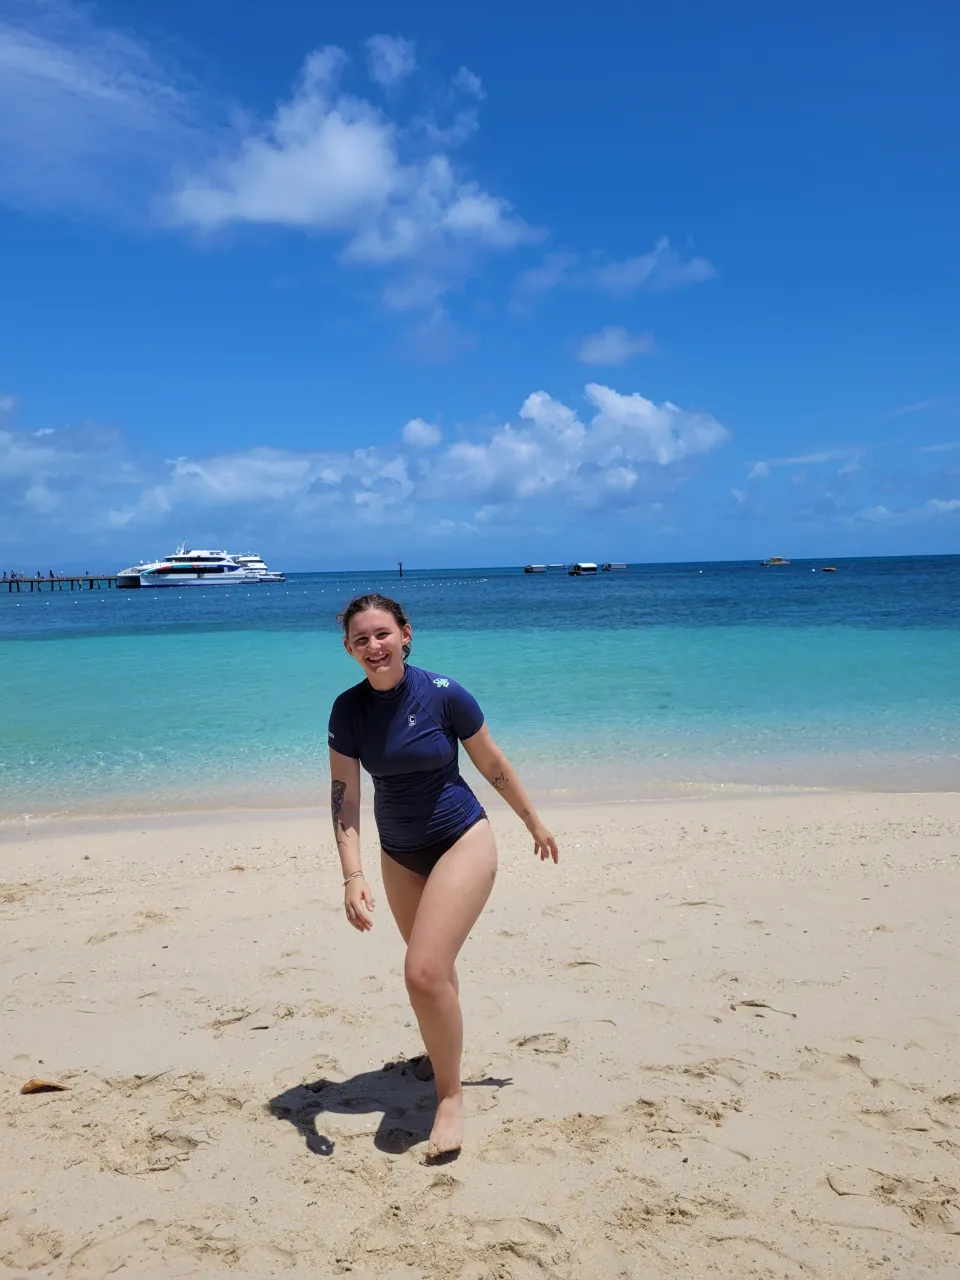 Leah Harries ‘24 in a navy swim suit next to tropical blue waters and a blue sky